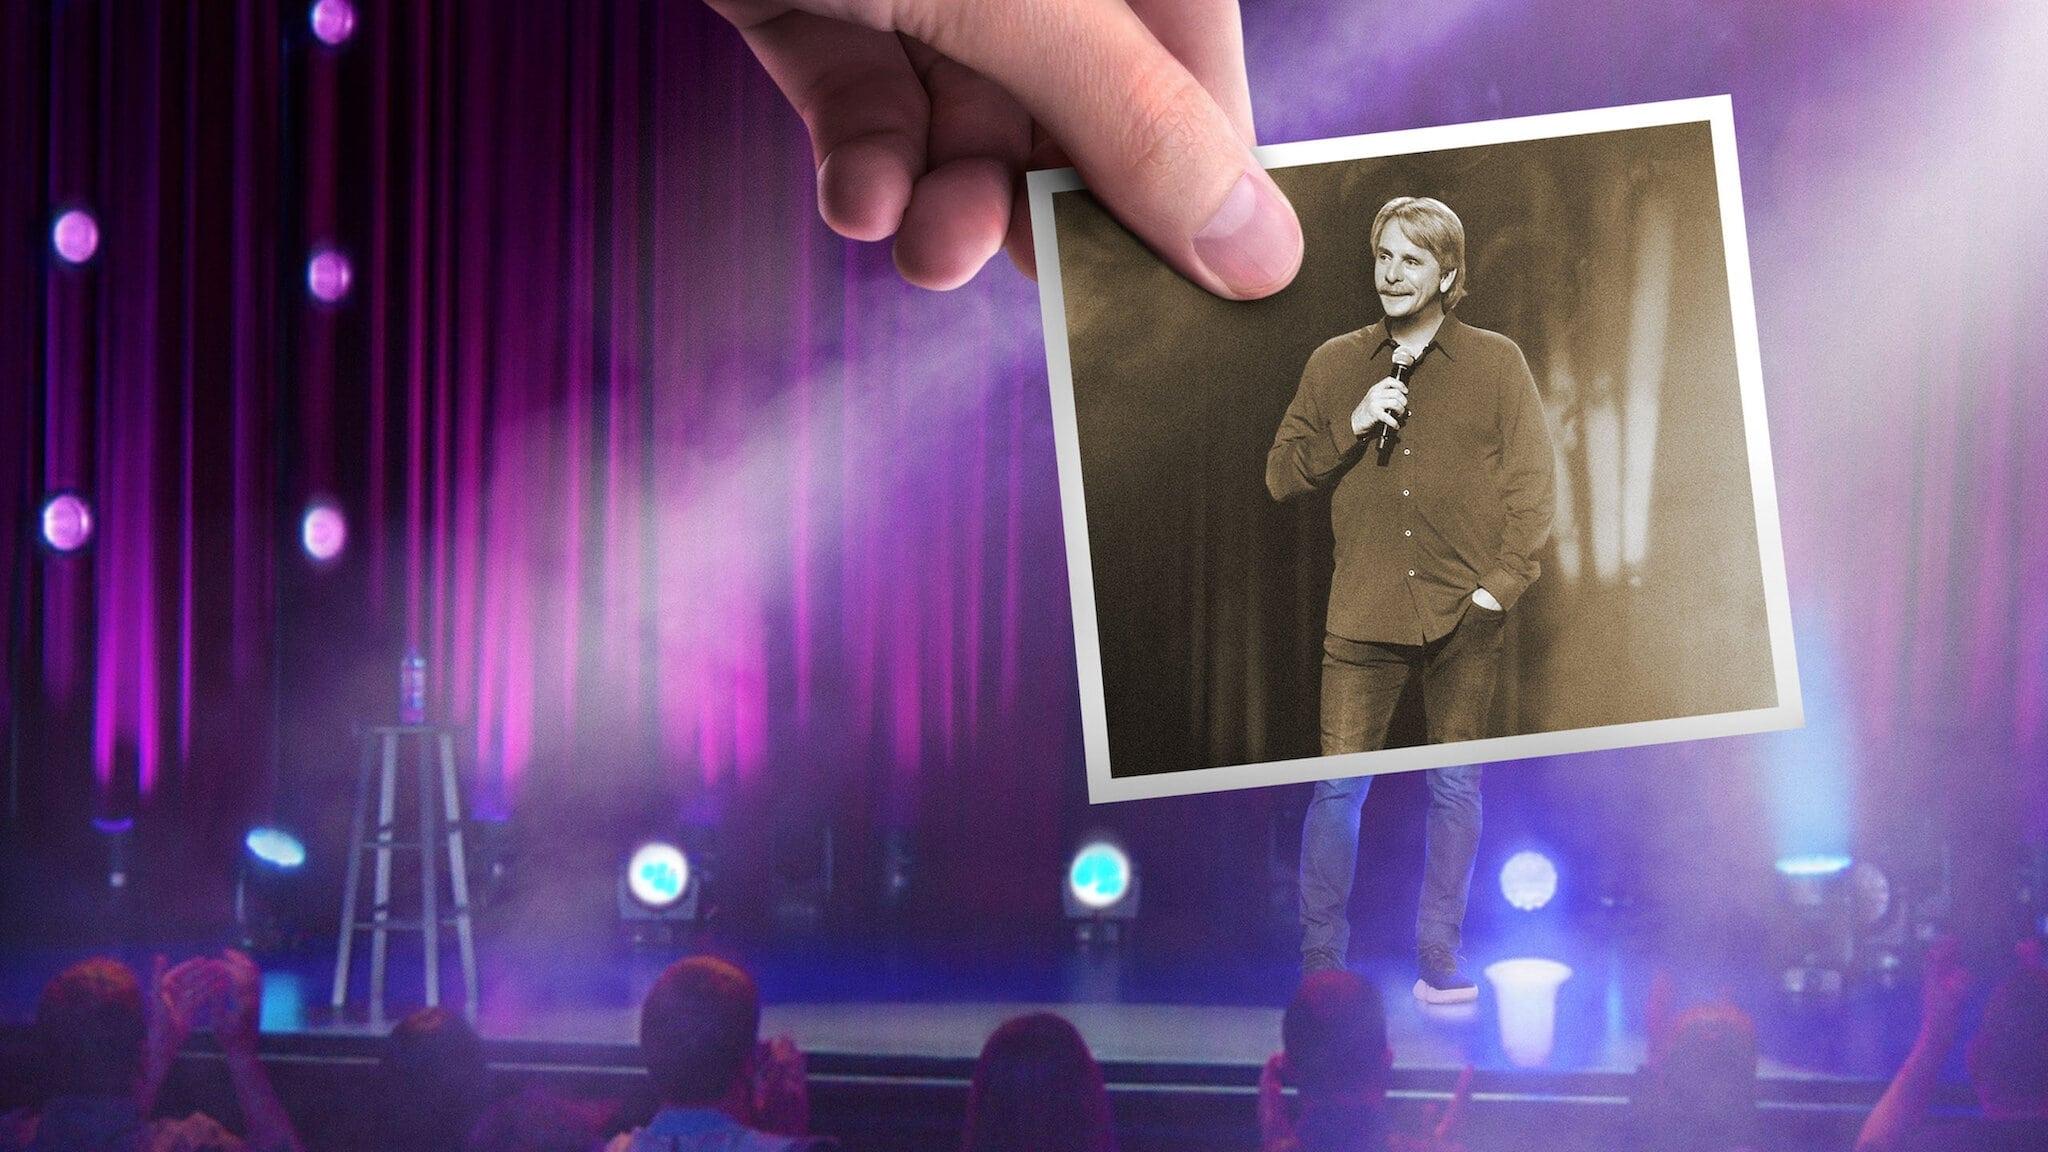 Jeff Foxworthy: The Good Old Days backdrop